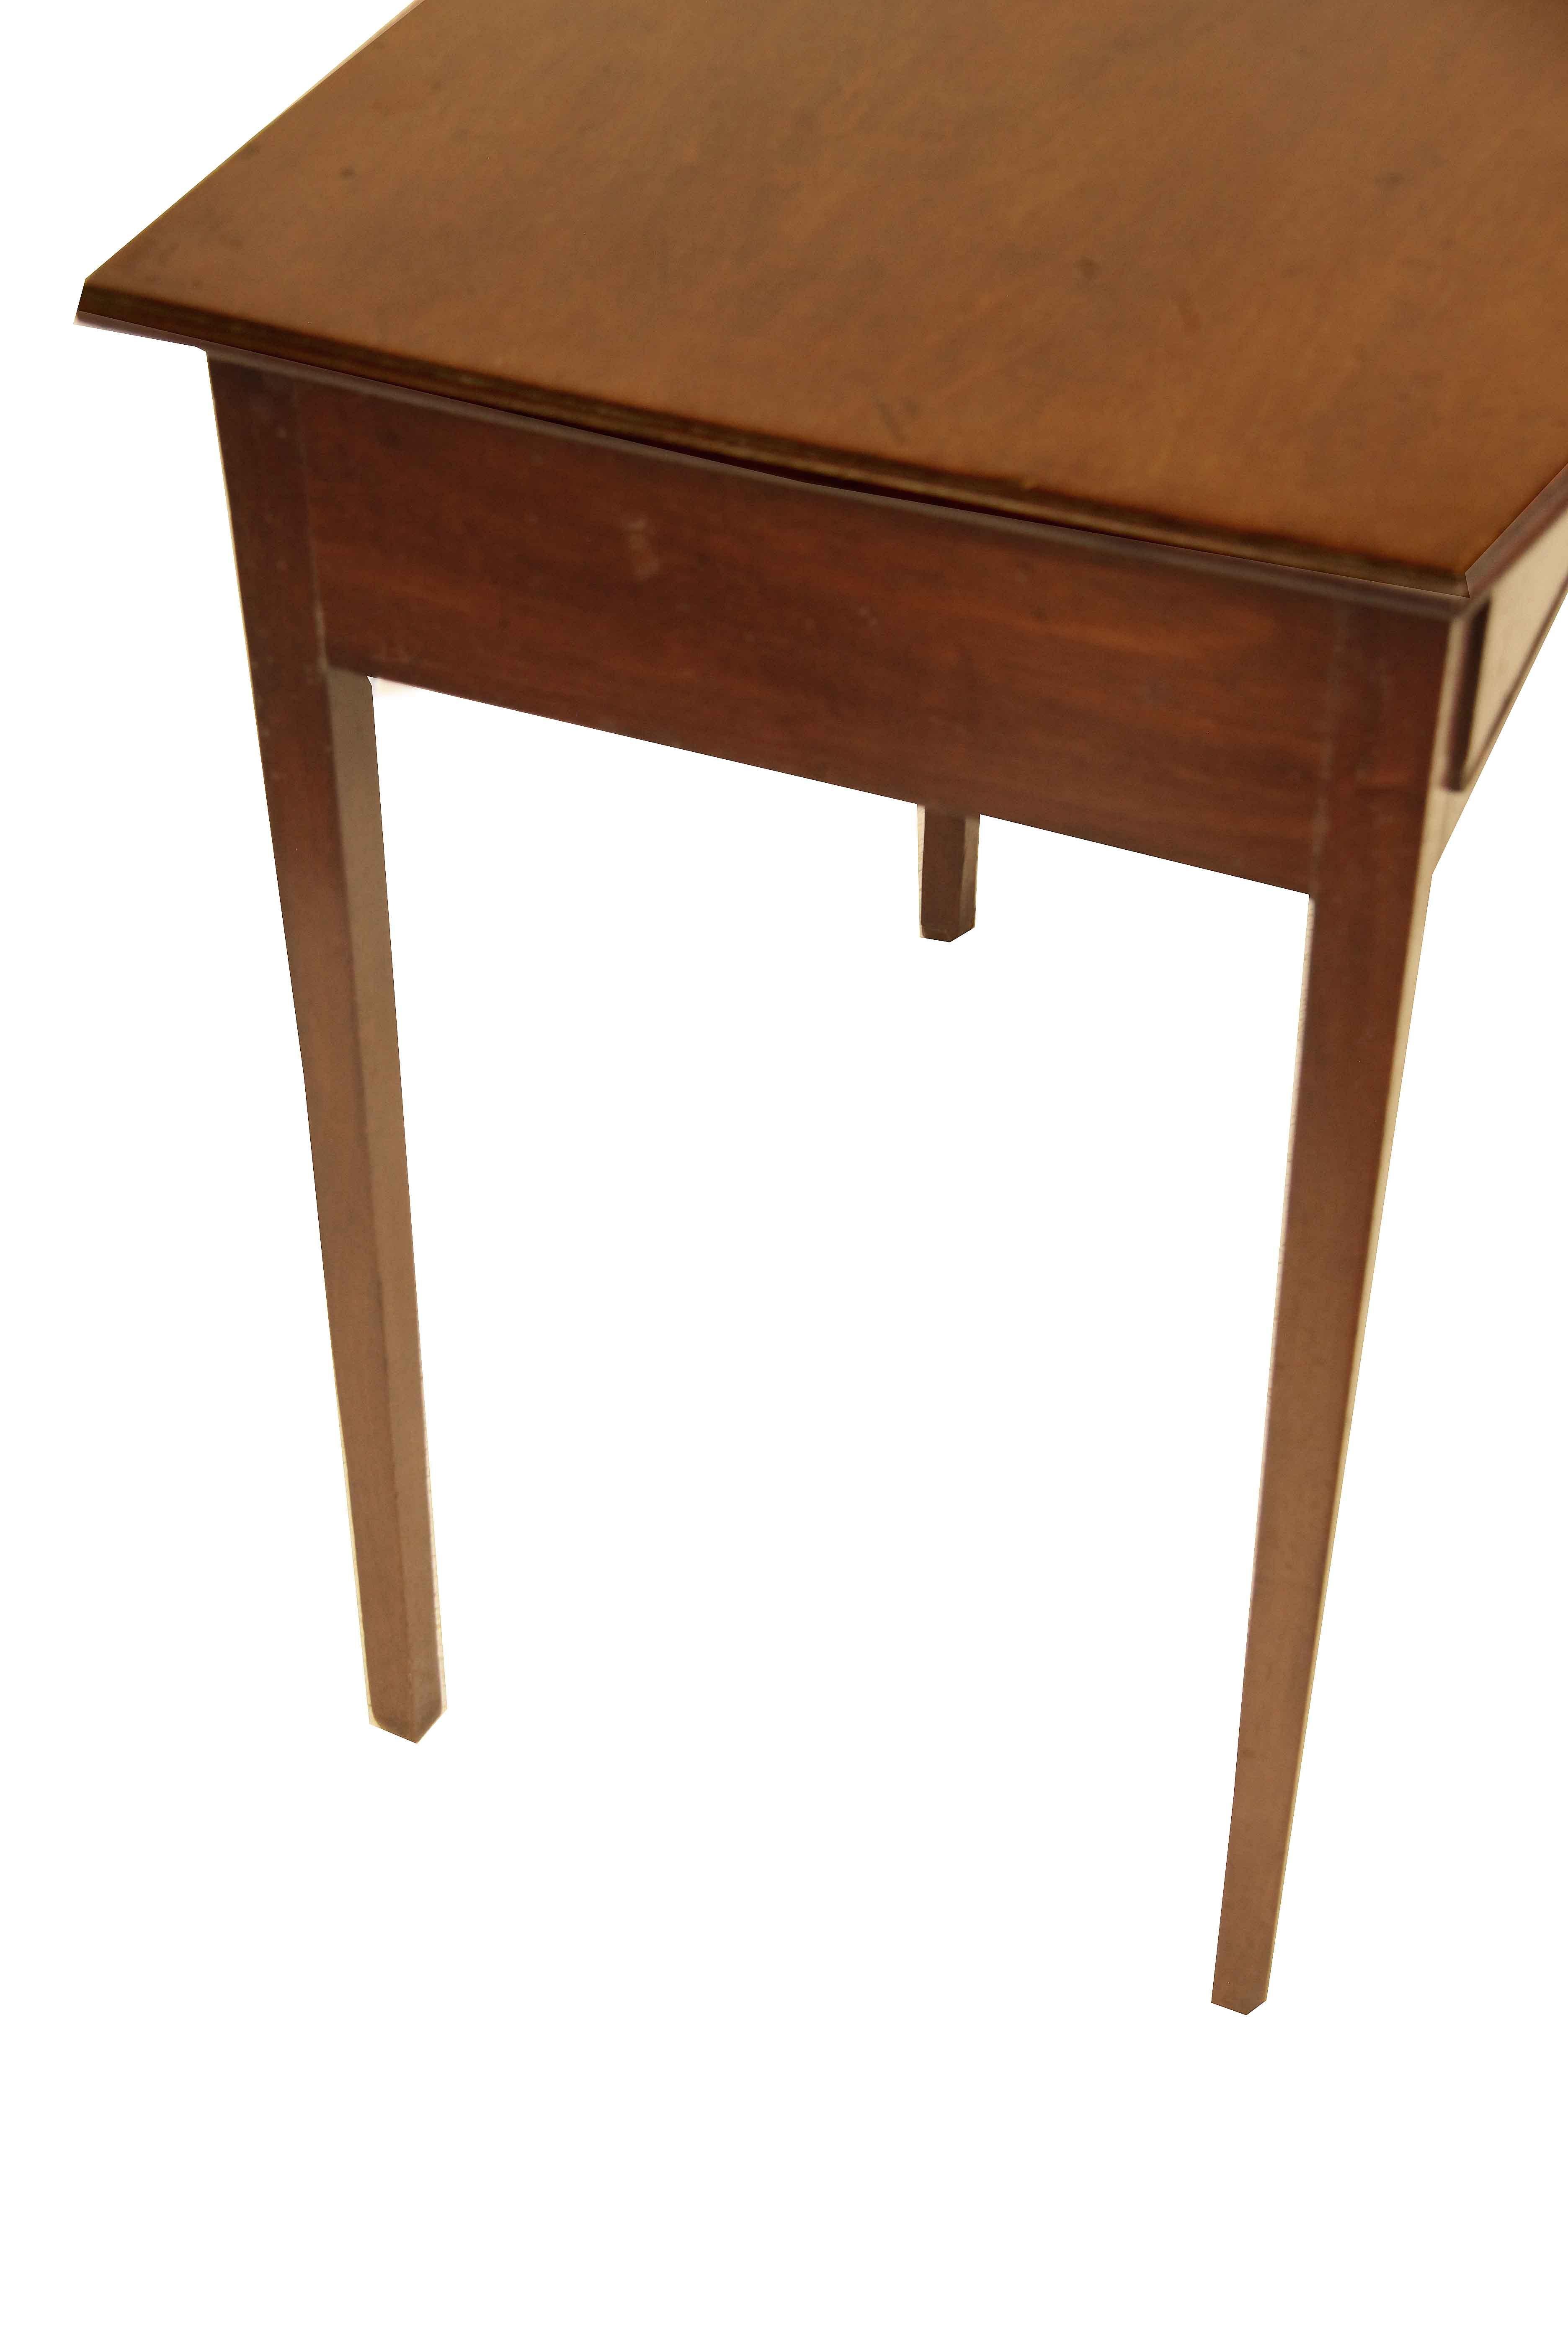 Hepplewhite bow front side table, this early 19th century table has a beautiful faded mahogany color and patina, especially the bow front top; the single drawer retains the original brass knob; pine is the secondary wood. The legs are nicely tapered.